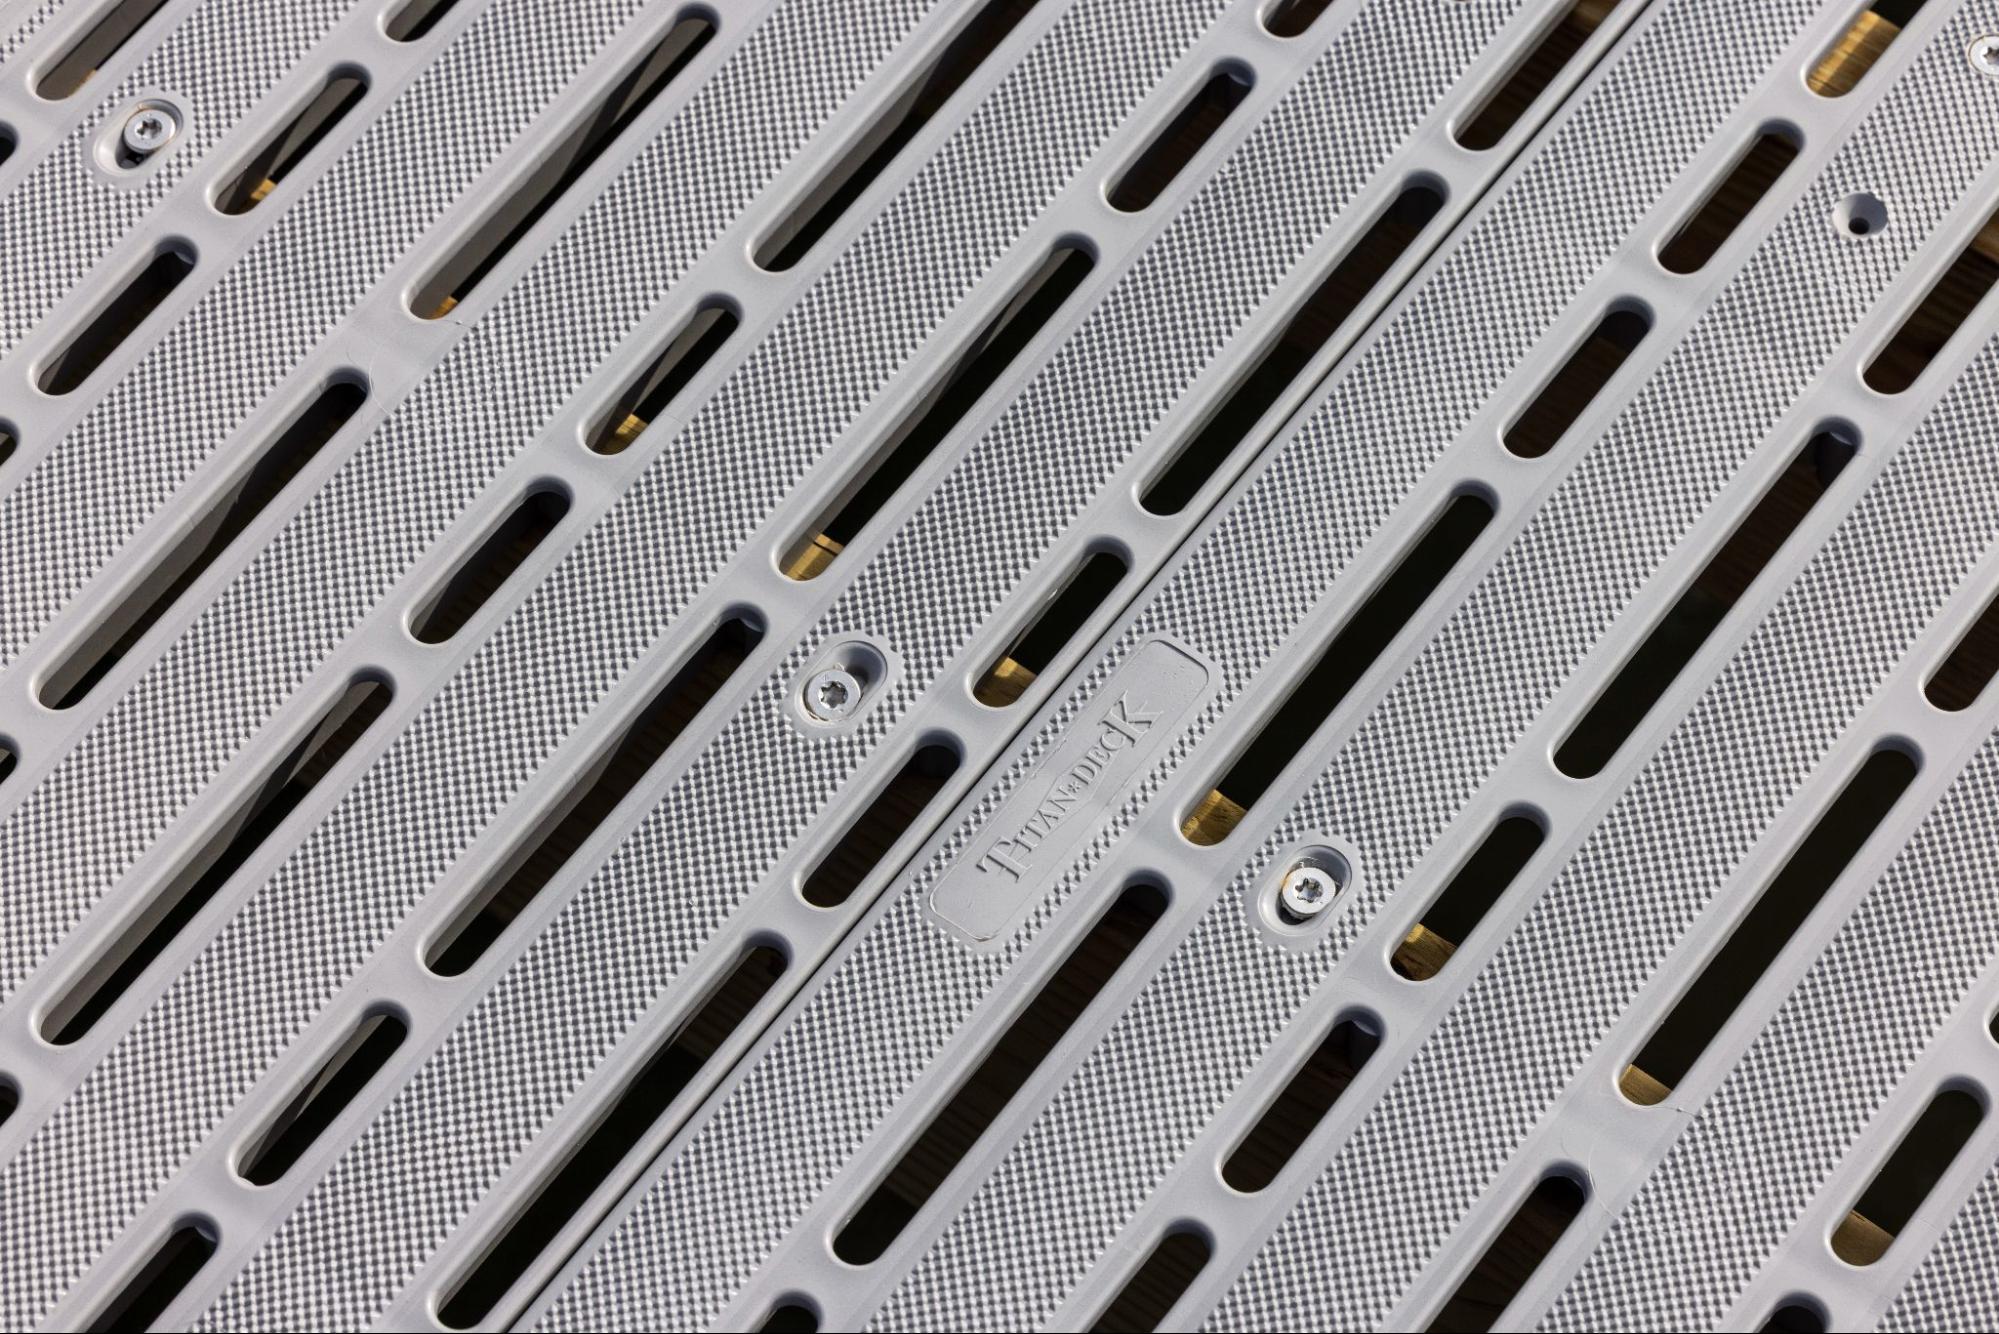  The photo depicts a close-up shot of a Titan Deck board. 